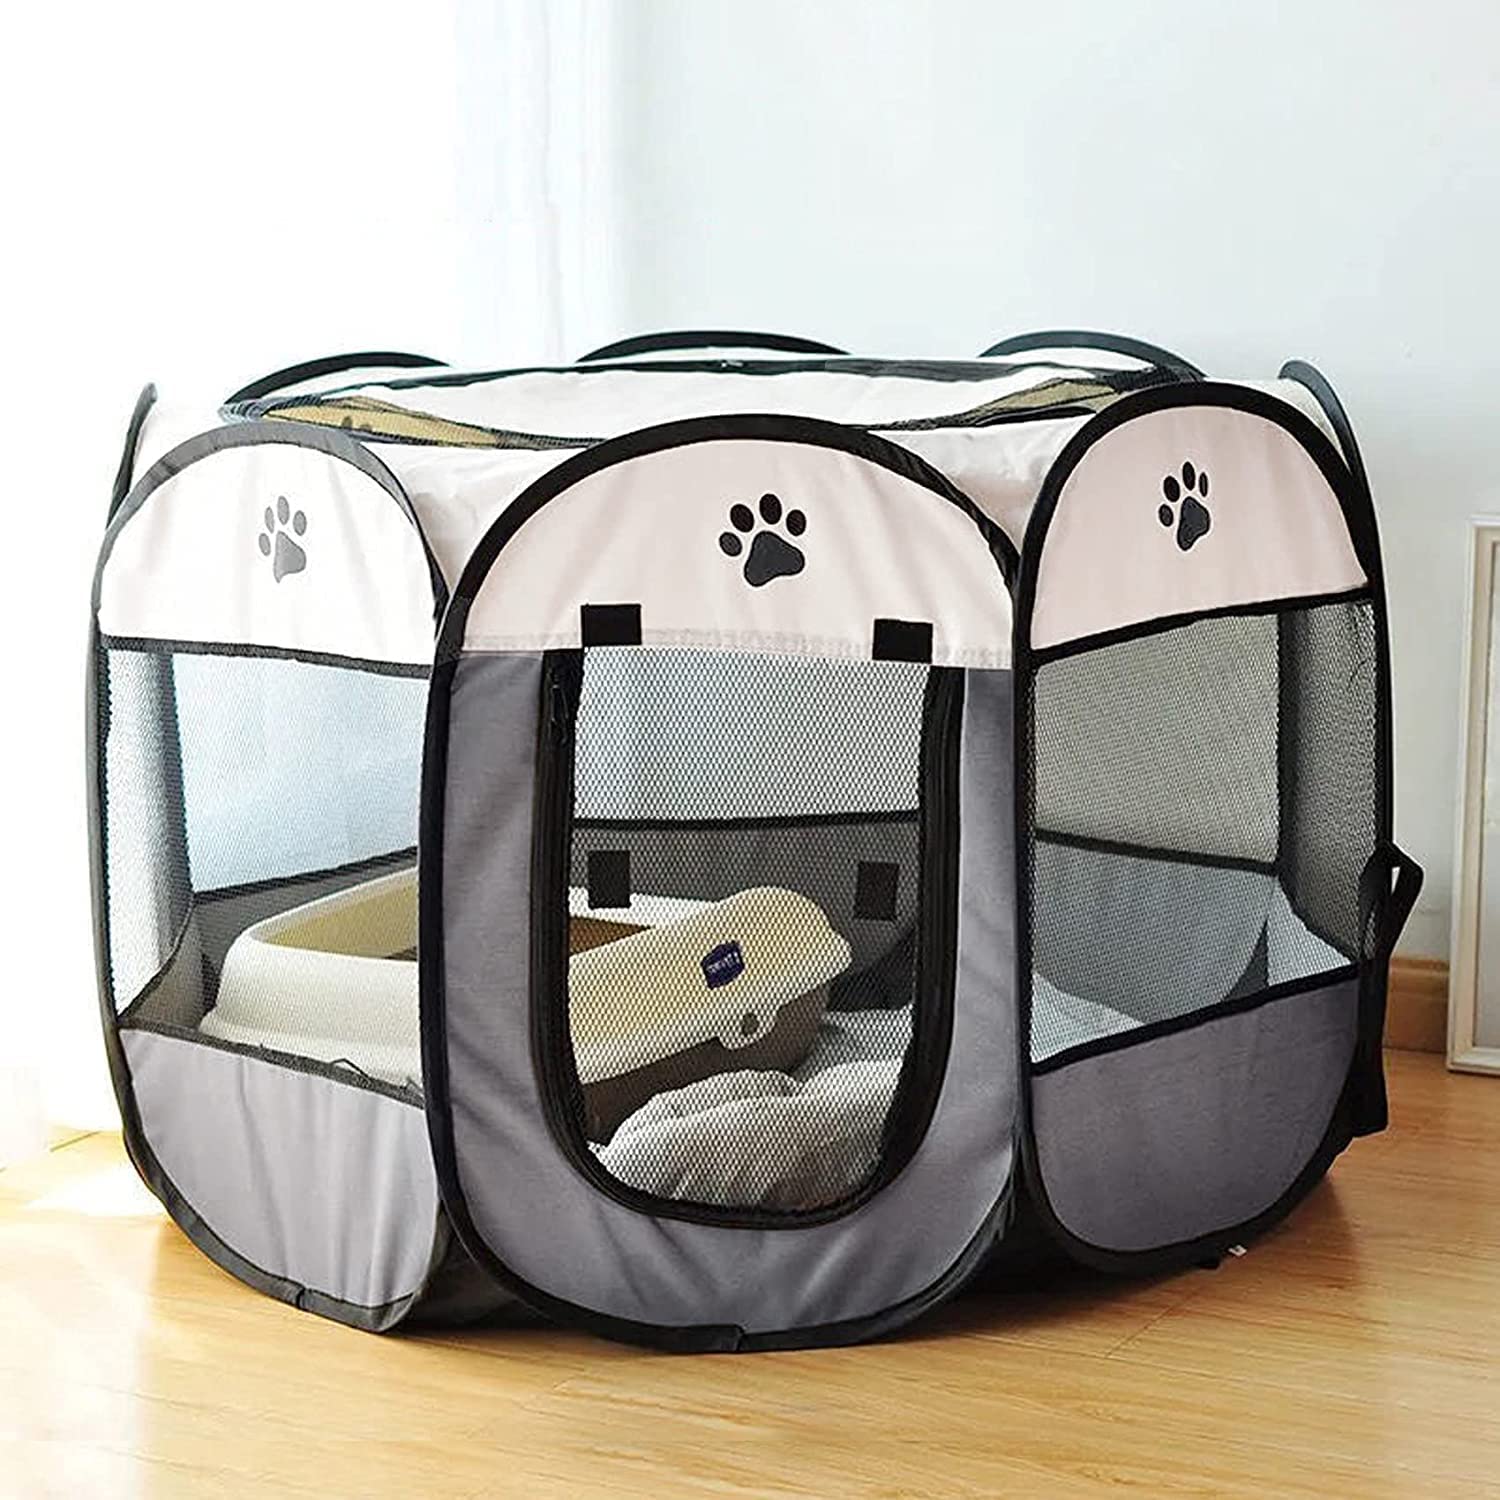 Kesoin Portable Pet Playpen Dog Kennel Pet Tent Playpen for Large Medium Dogs/Cats/Rabbits/Hamster Cat Delivery Room Playpen Travel 